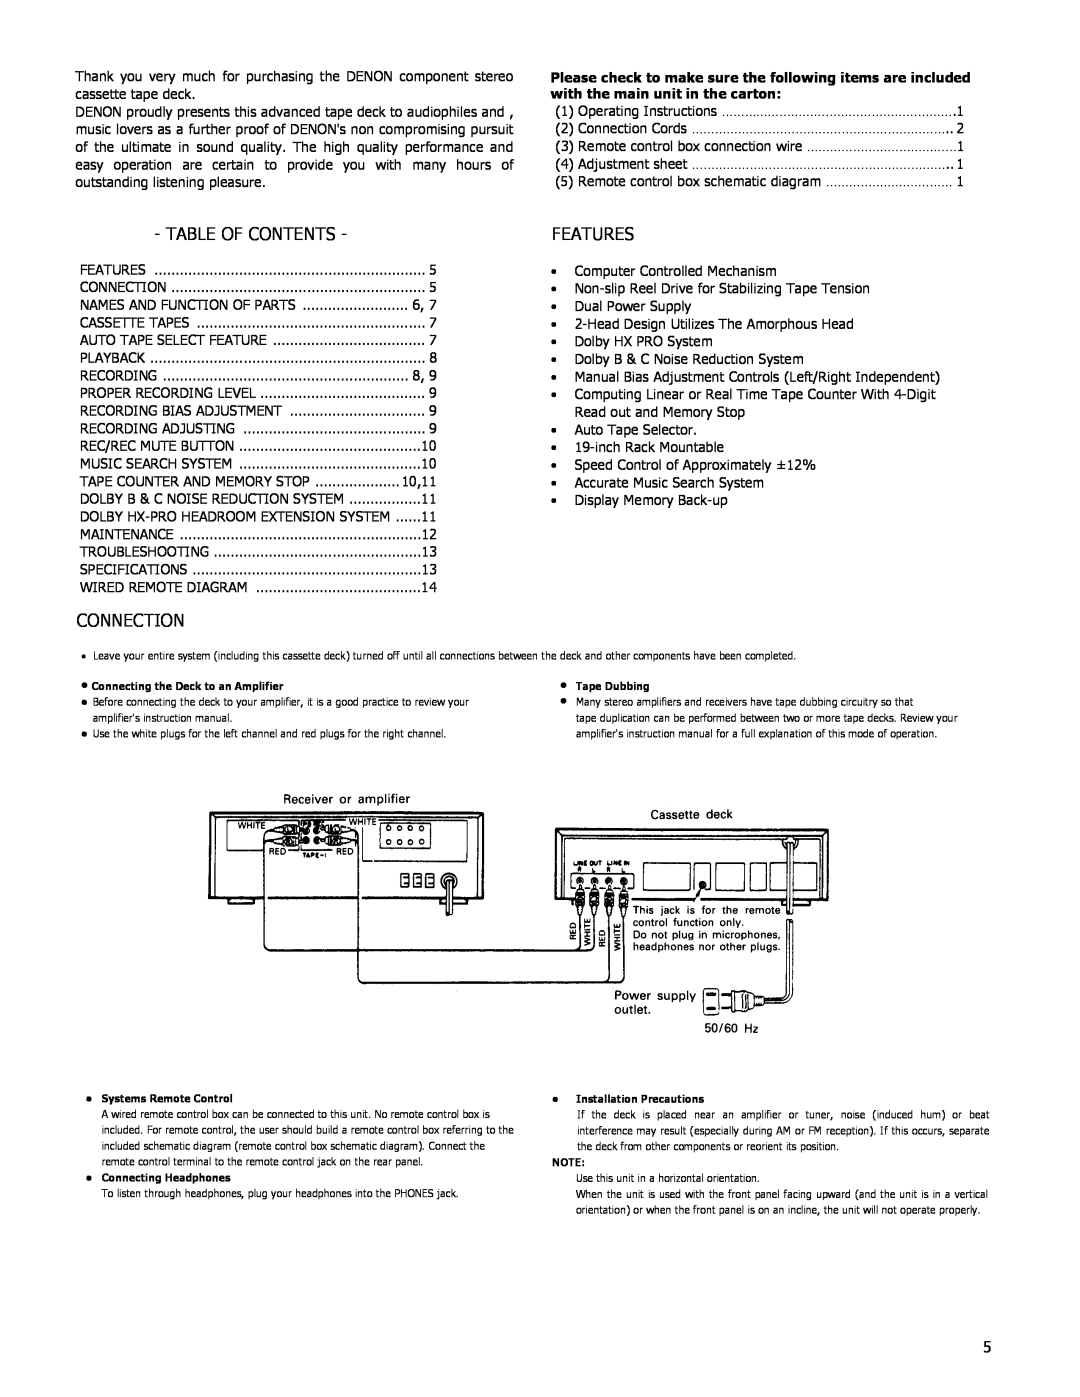 Denon DN-720R operating instructions Table Of Contents, Features, Connection 